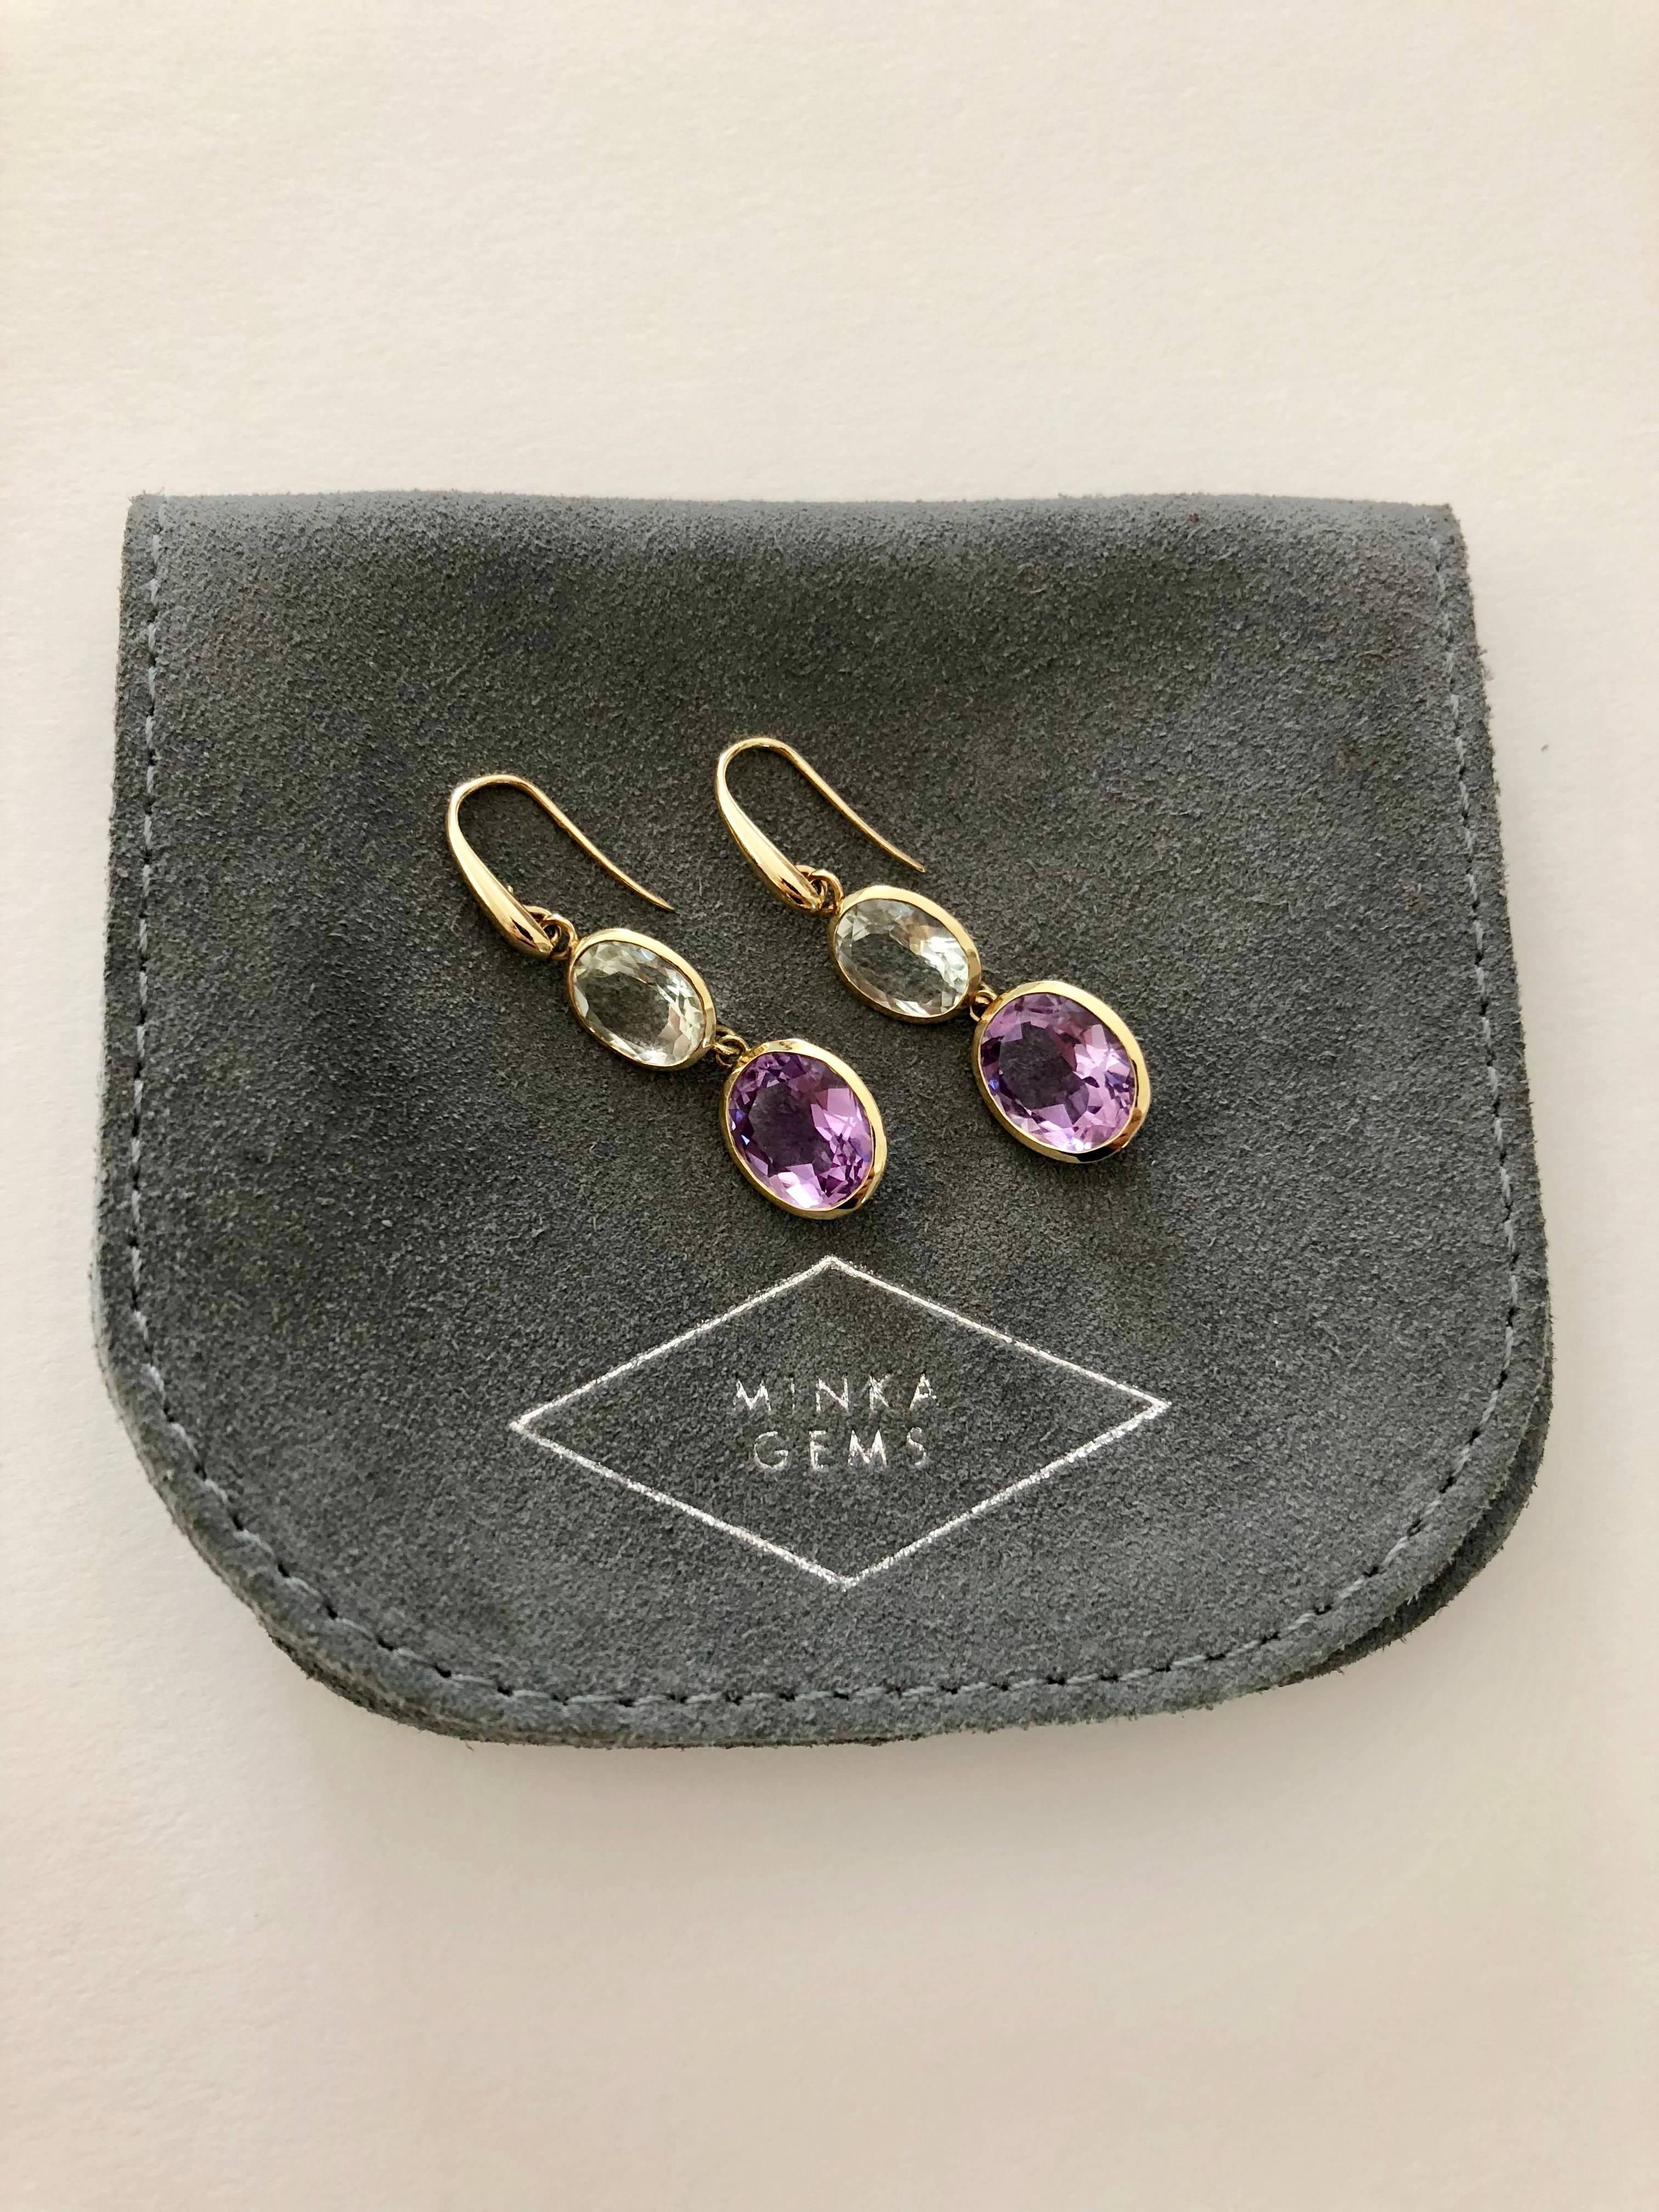 Indian Ocean Earrings - Stylish and elegant this stunning pair of earrings is made from 18kt yellow gold and semi precious stones. Designed and carefully hand crafted in the UK.

18 karat yellow gold
6.4 grams 
Lilac Amethyst & Prasiolite gem